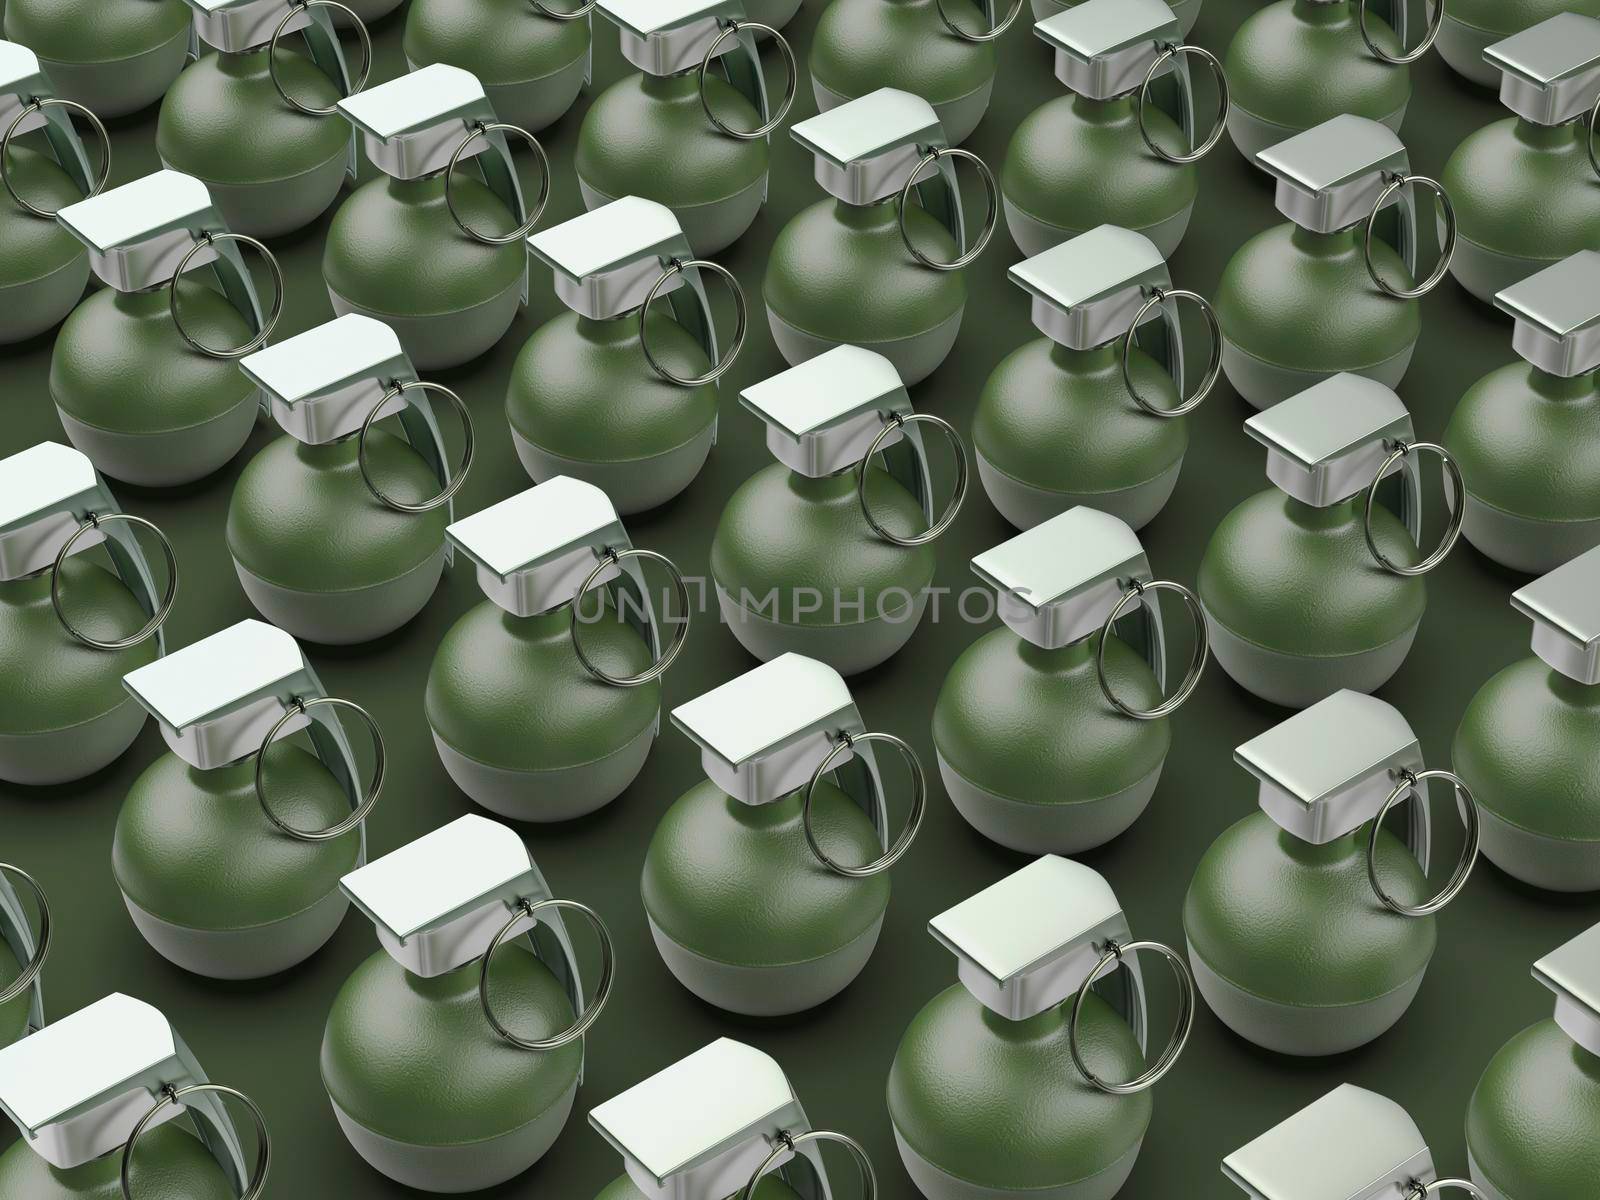 Many rows with hand grenades